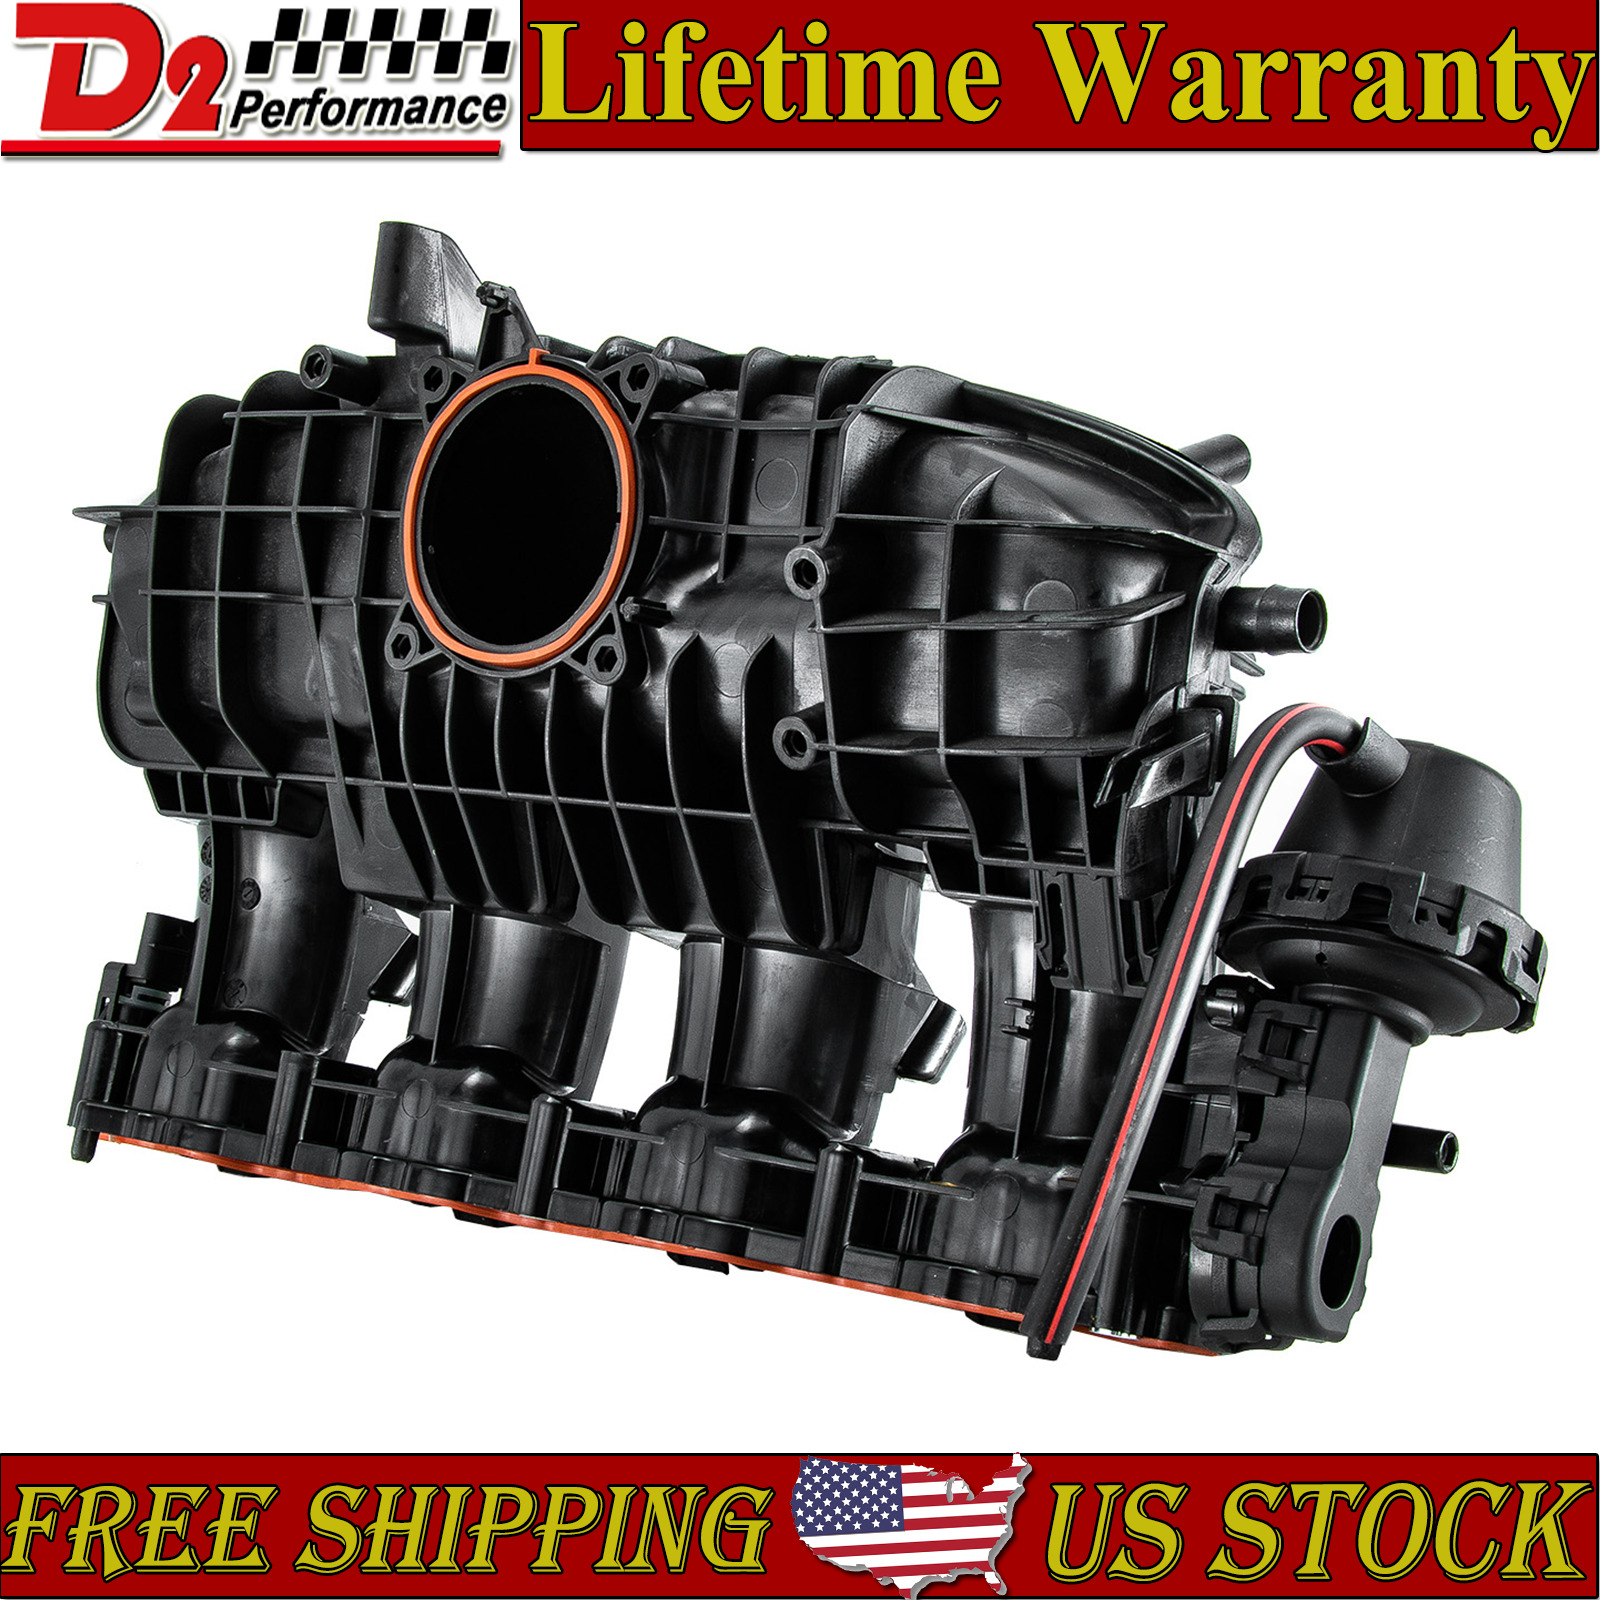 Intake Manifold For 2013-2018 Audi A3 A4 A5 A6 Q3 Volkswagen Beetle Golf 1.8 2.0